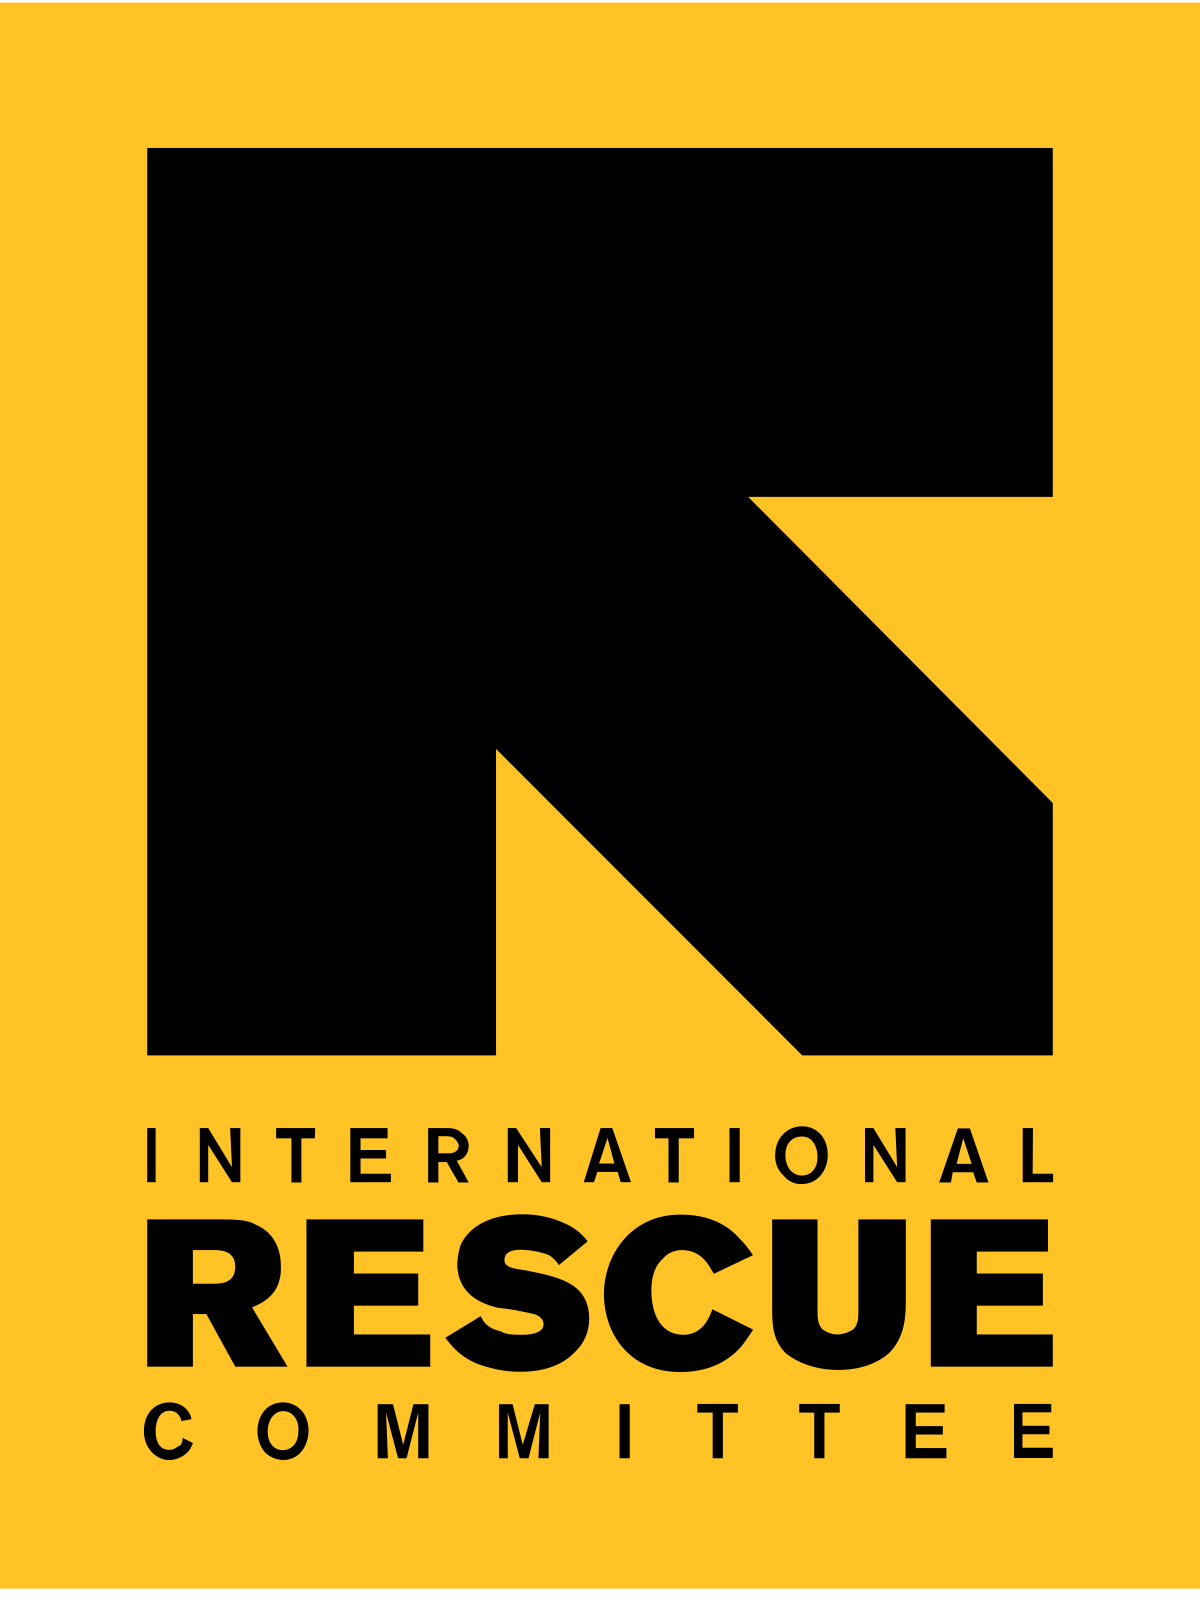 International Rescue Committee (IRC) Job Recruitment 2021/2022 – How to Apply